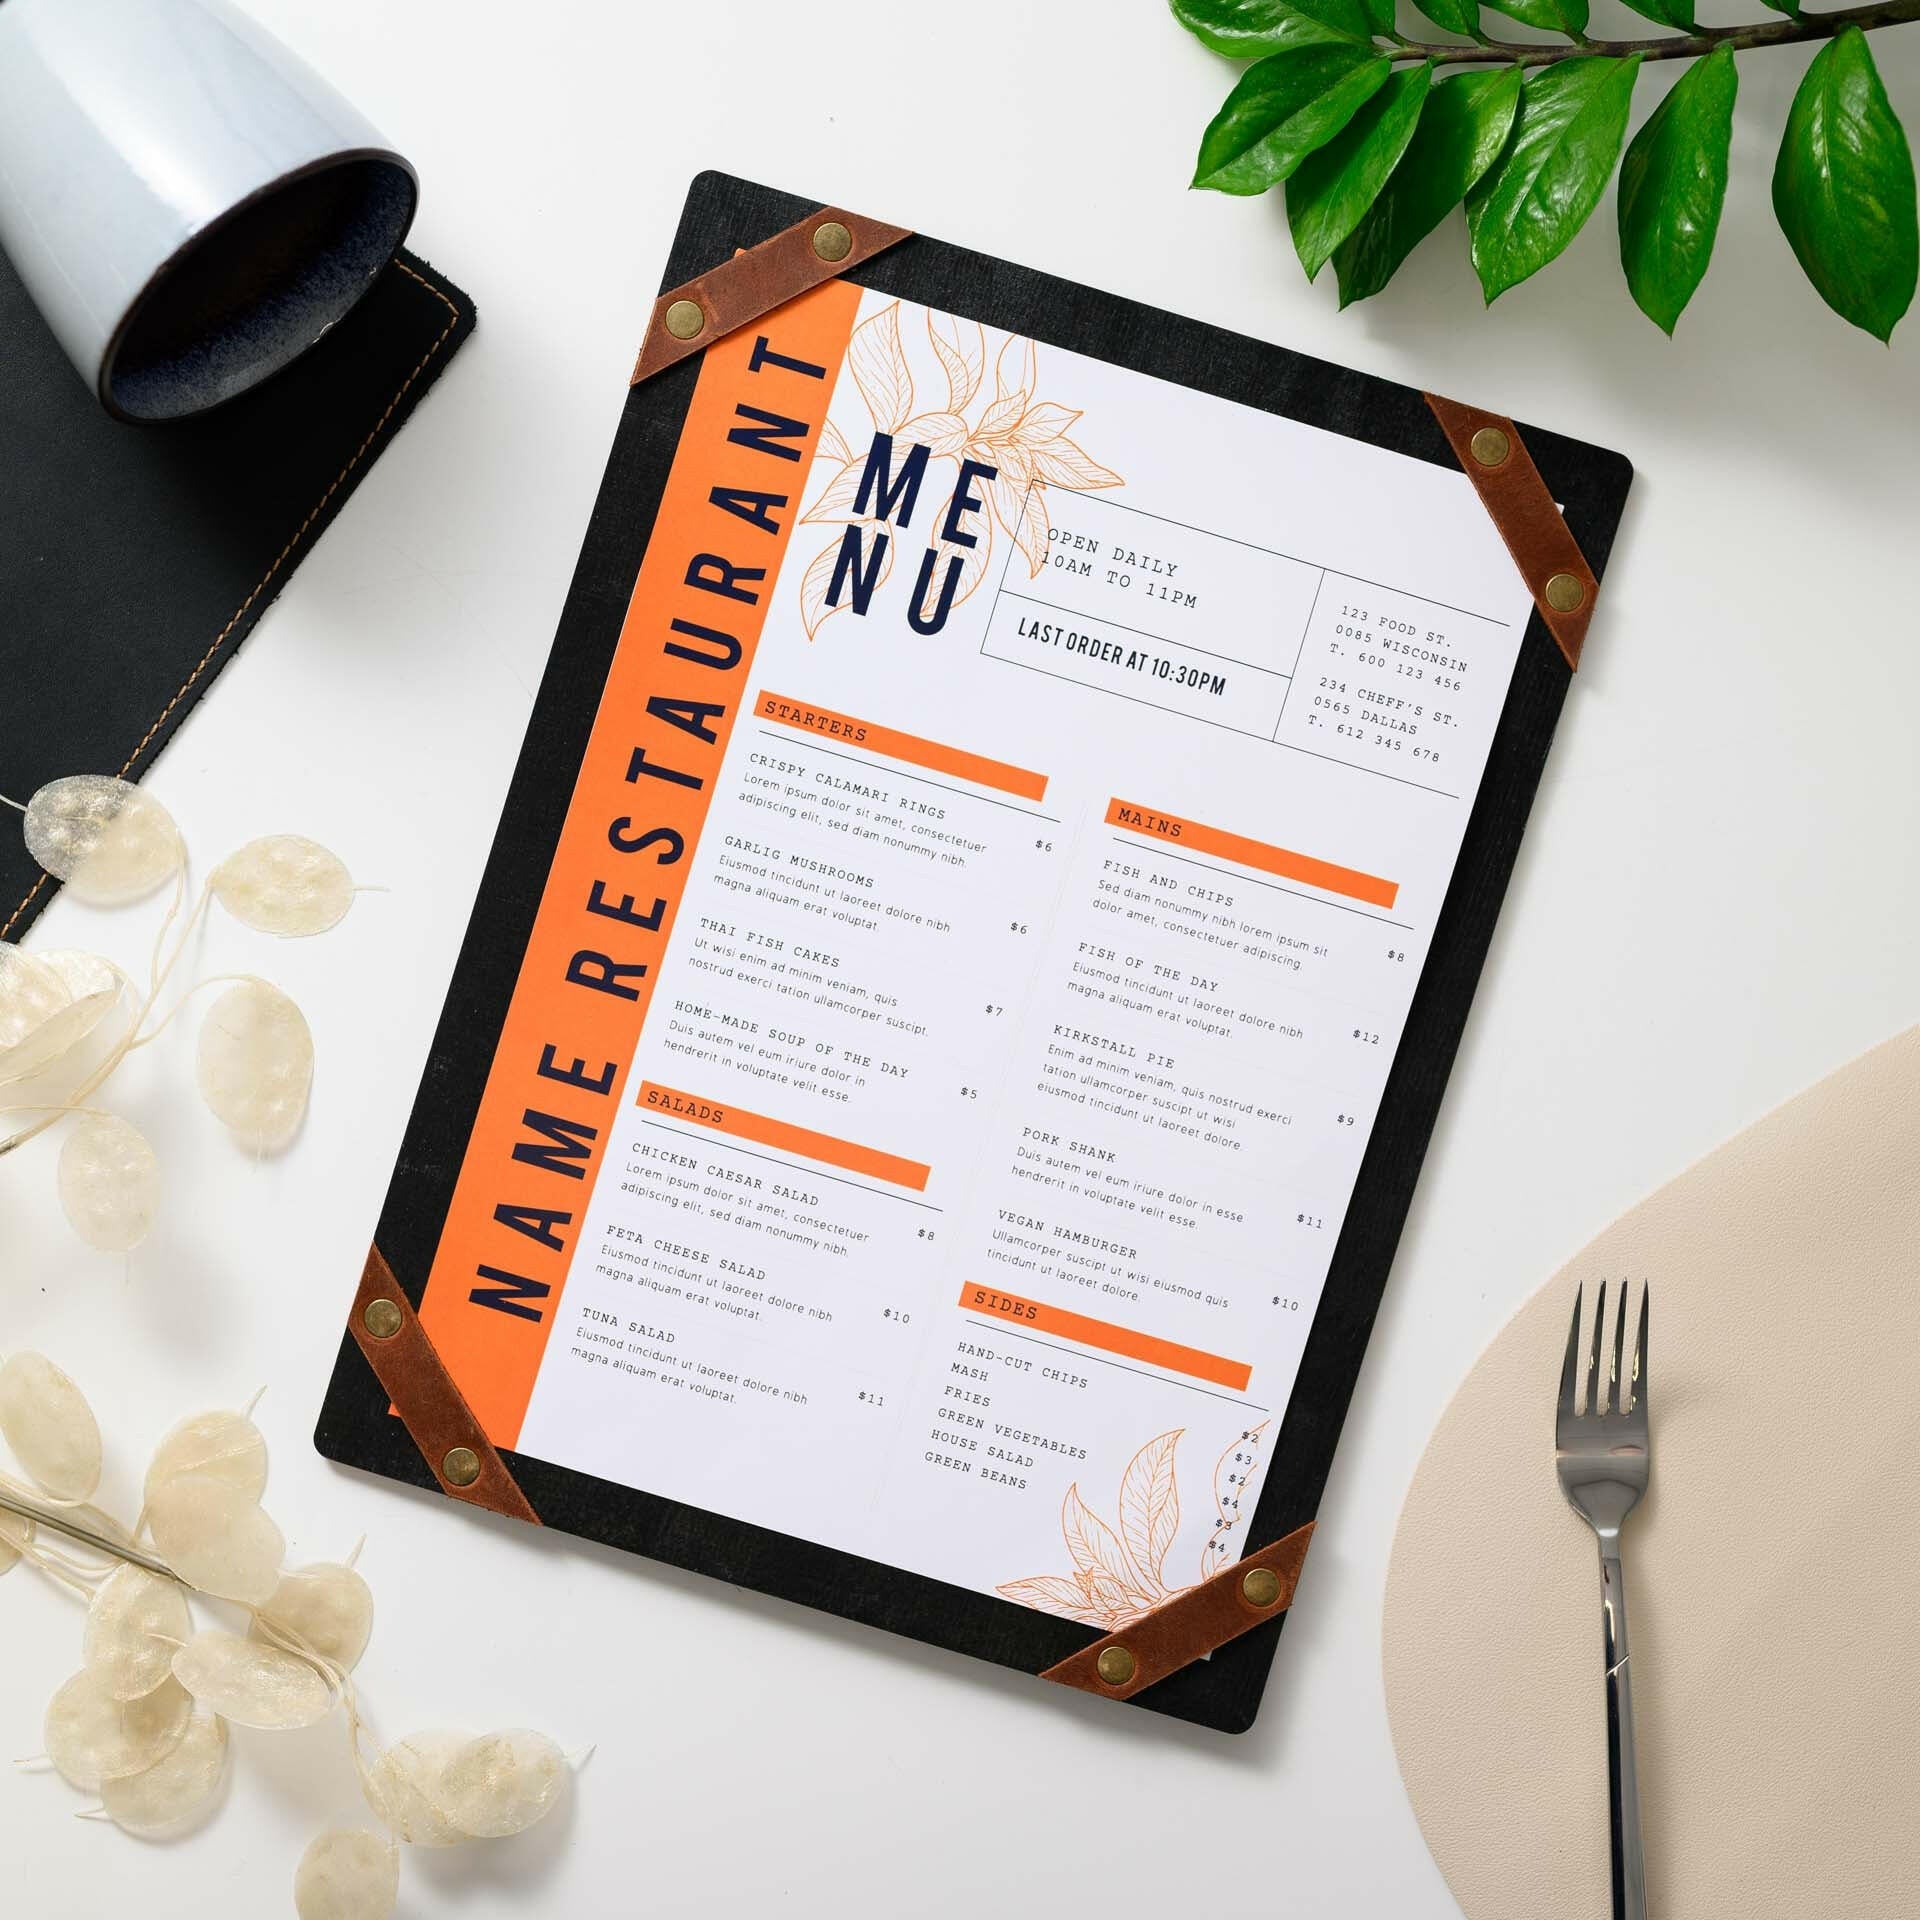 Engraved Menu Holder: Adds a personalized touch to your menu presentation.